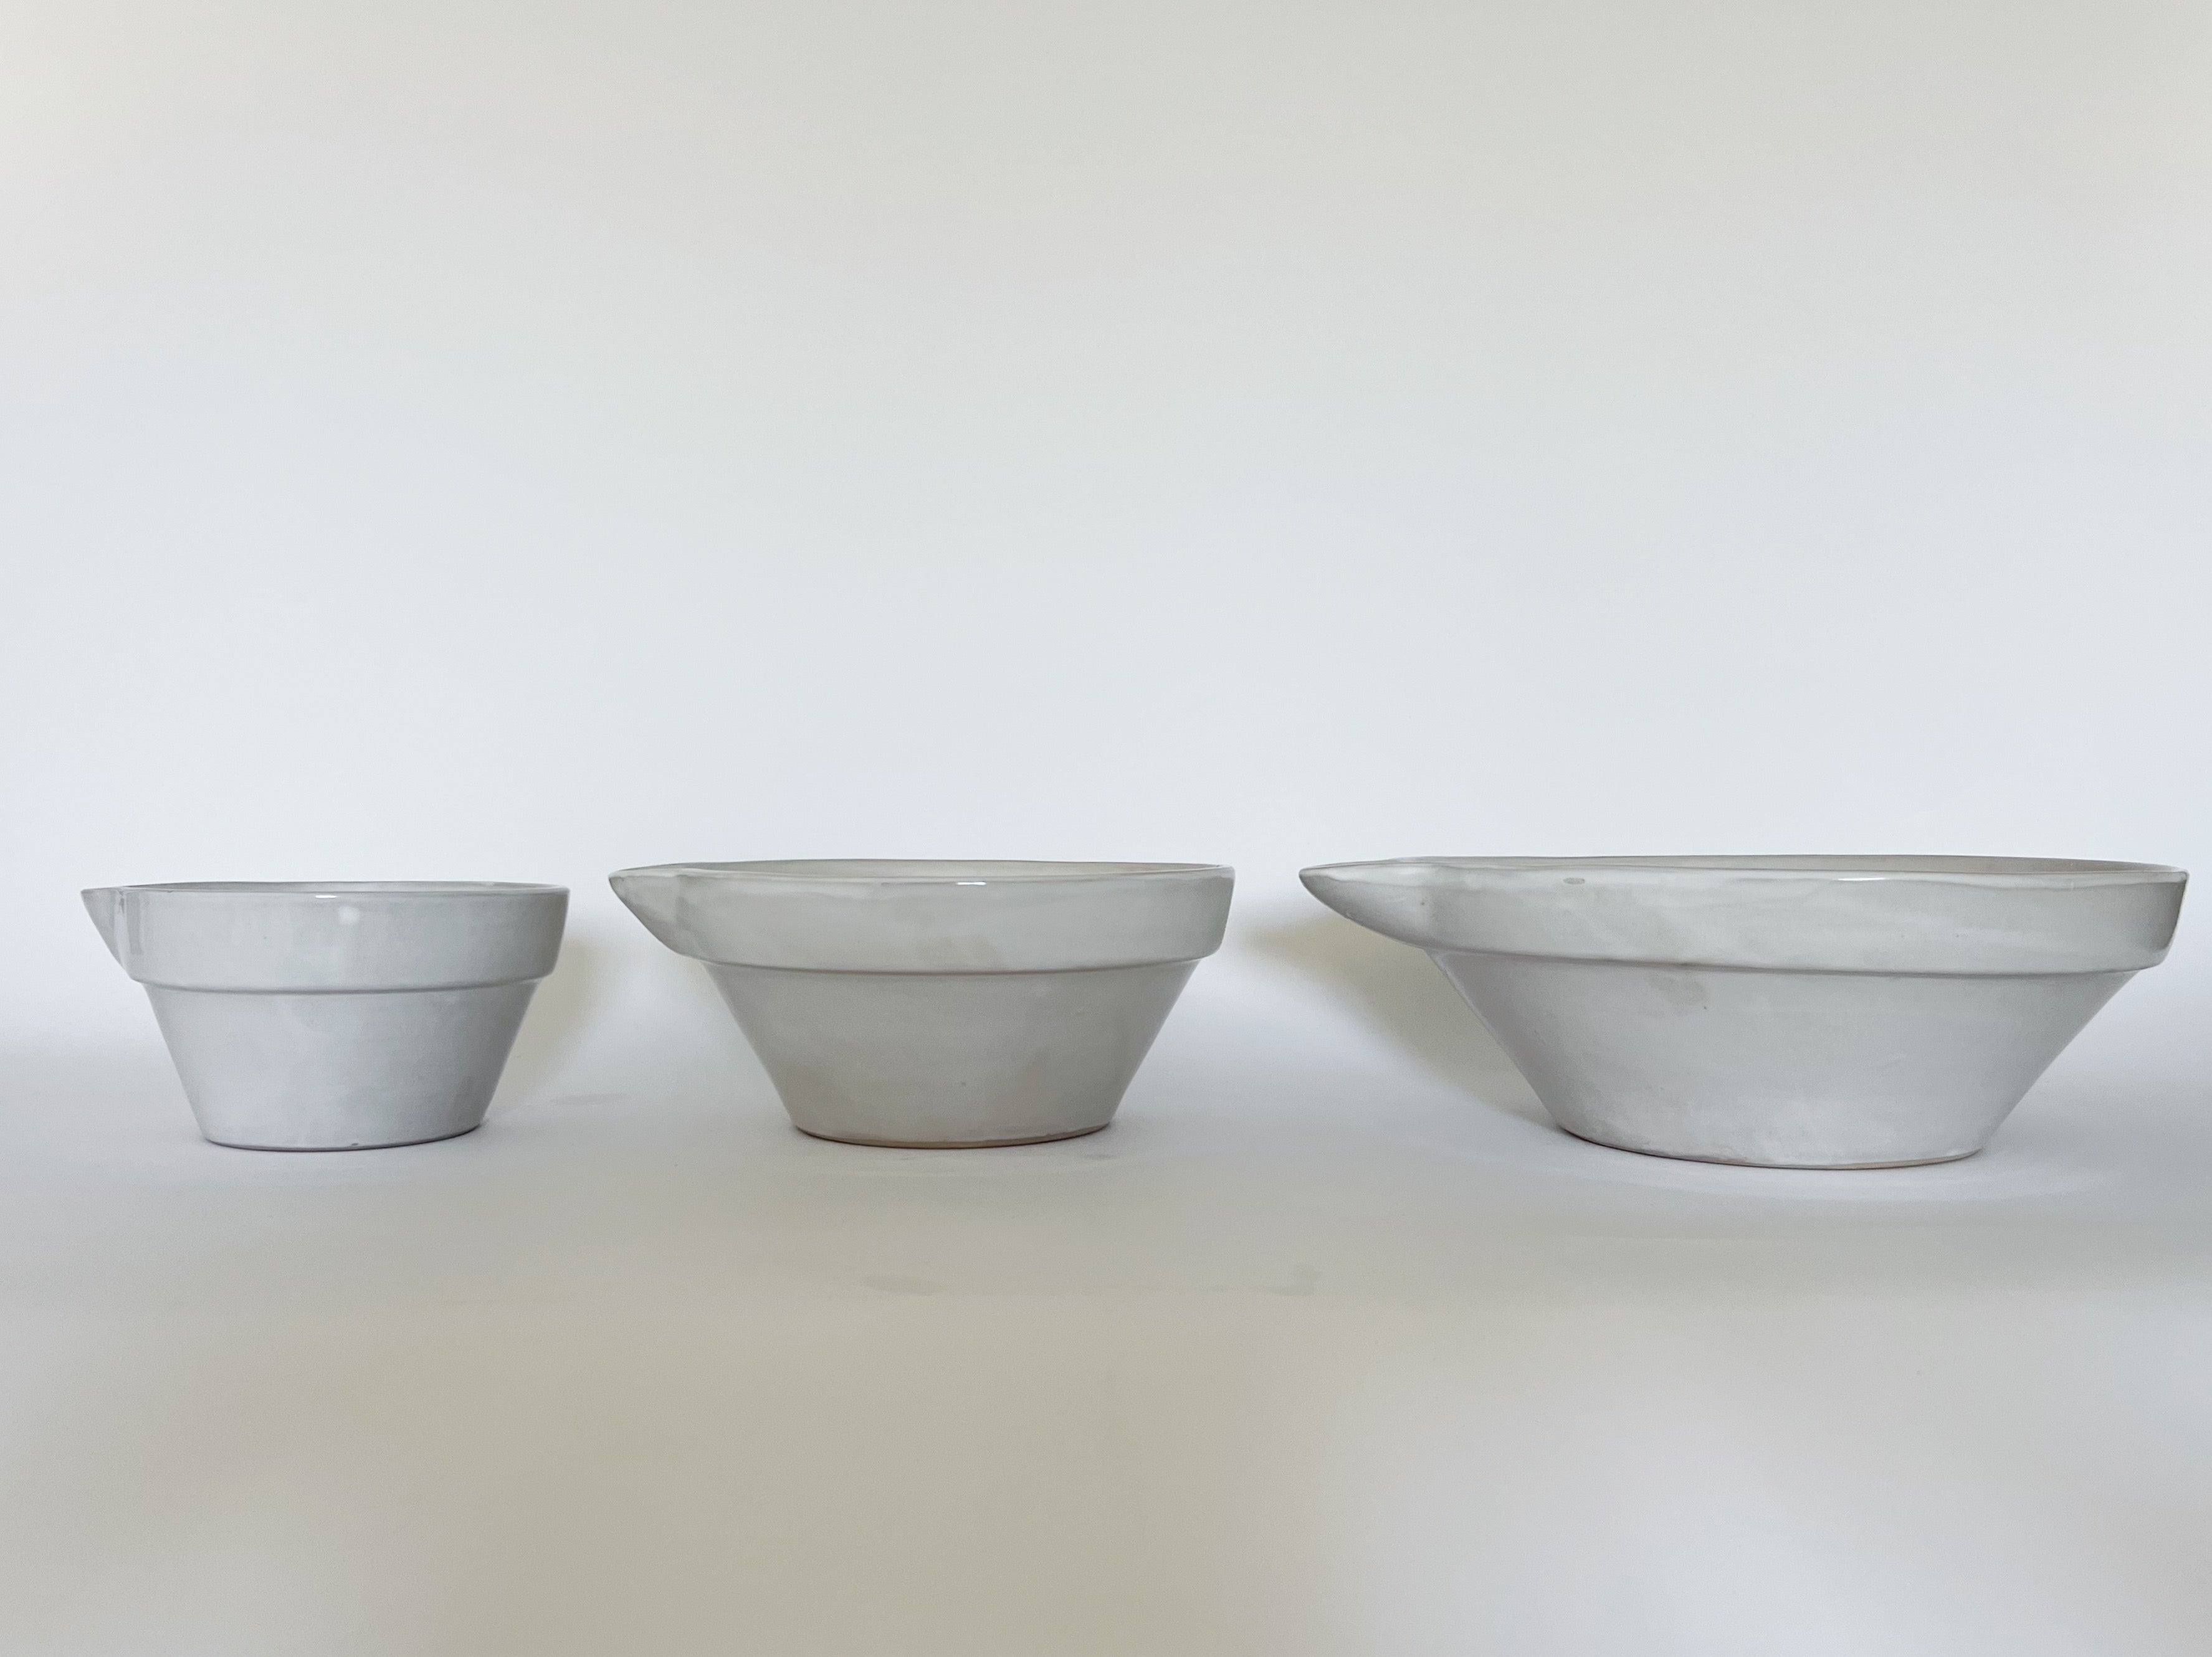 French Dry Goods Kitchen Essentials—Set of 3 Spouted Mixing Bowls French Dry Goods french cooking french culinary pottery French kitchen essentials french mixing bowls french pottery mixing bowls New Arrivals new arrivals 2023 277FC509-84C6-476C-9606-F5162CD5C984_1